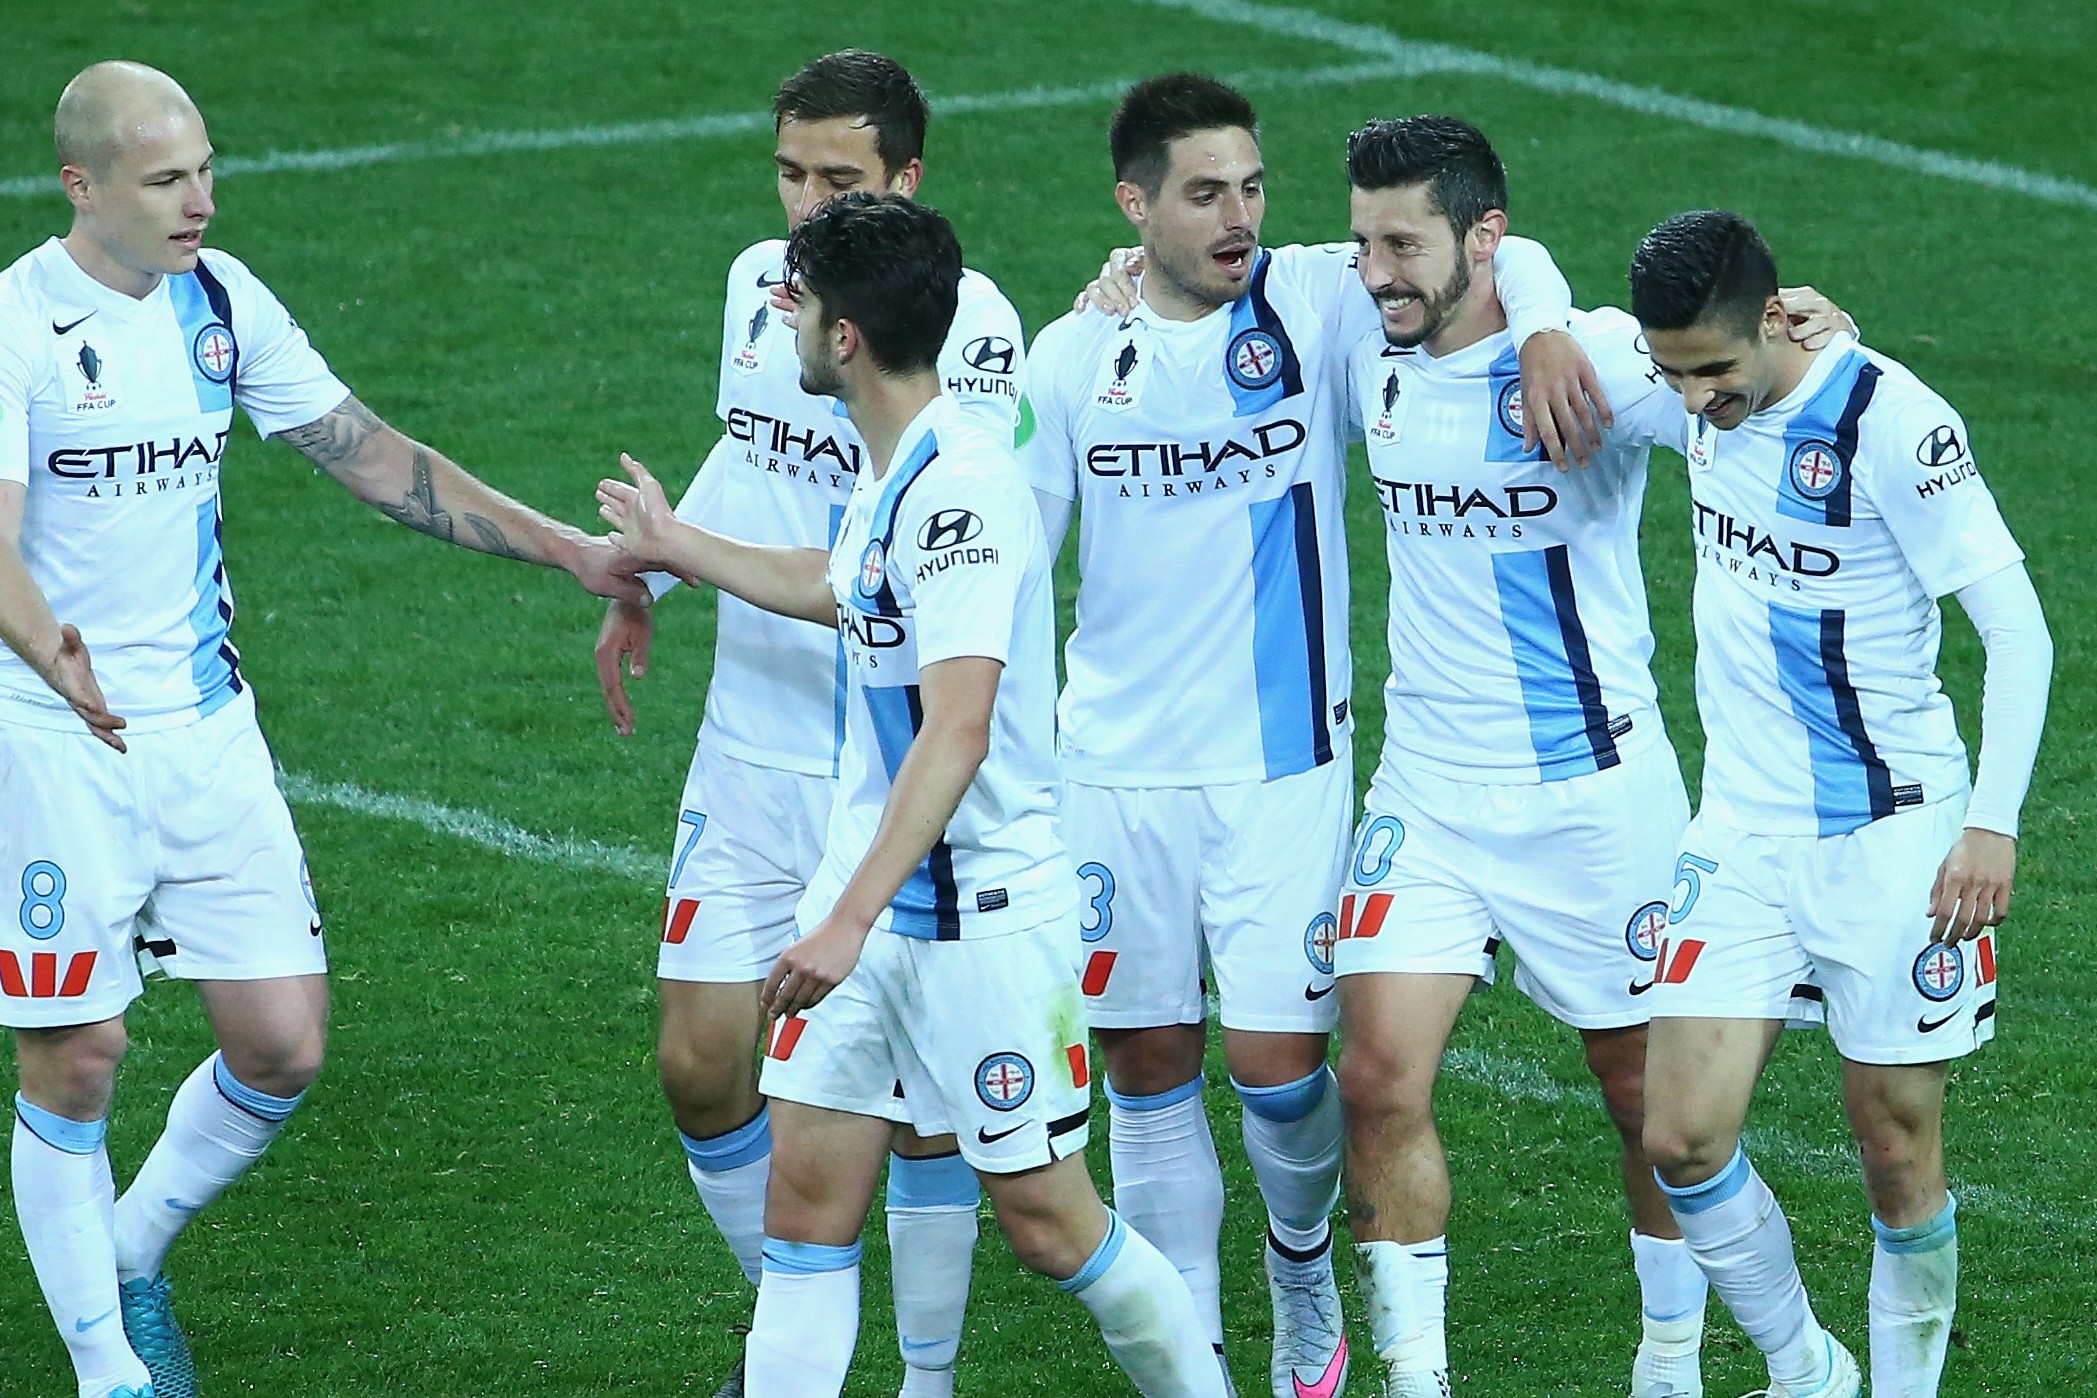 Melbourne City Down One More Player as Bouzanis Gets Suspended Five Games